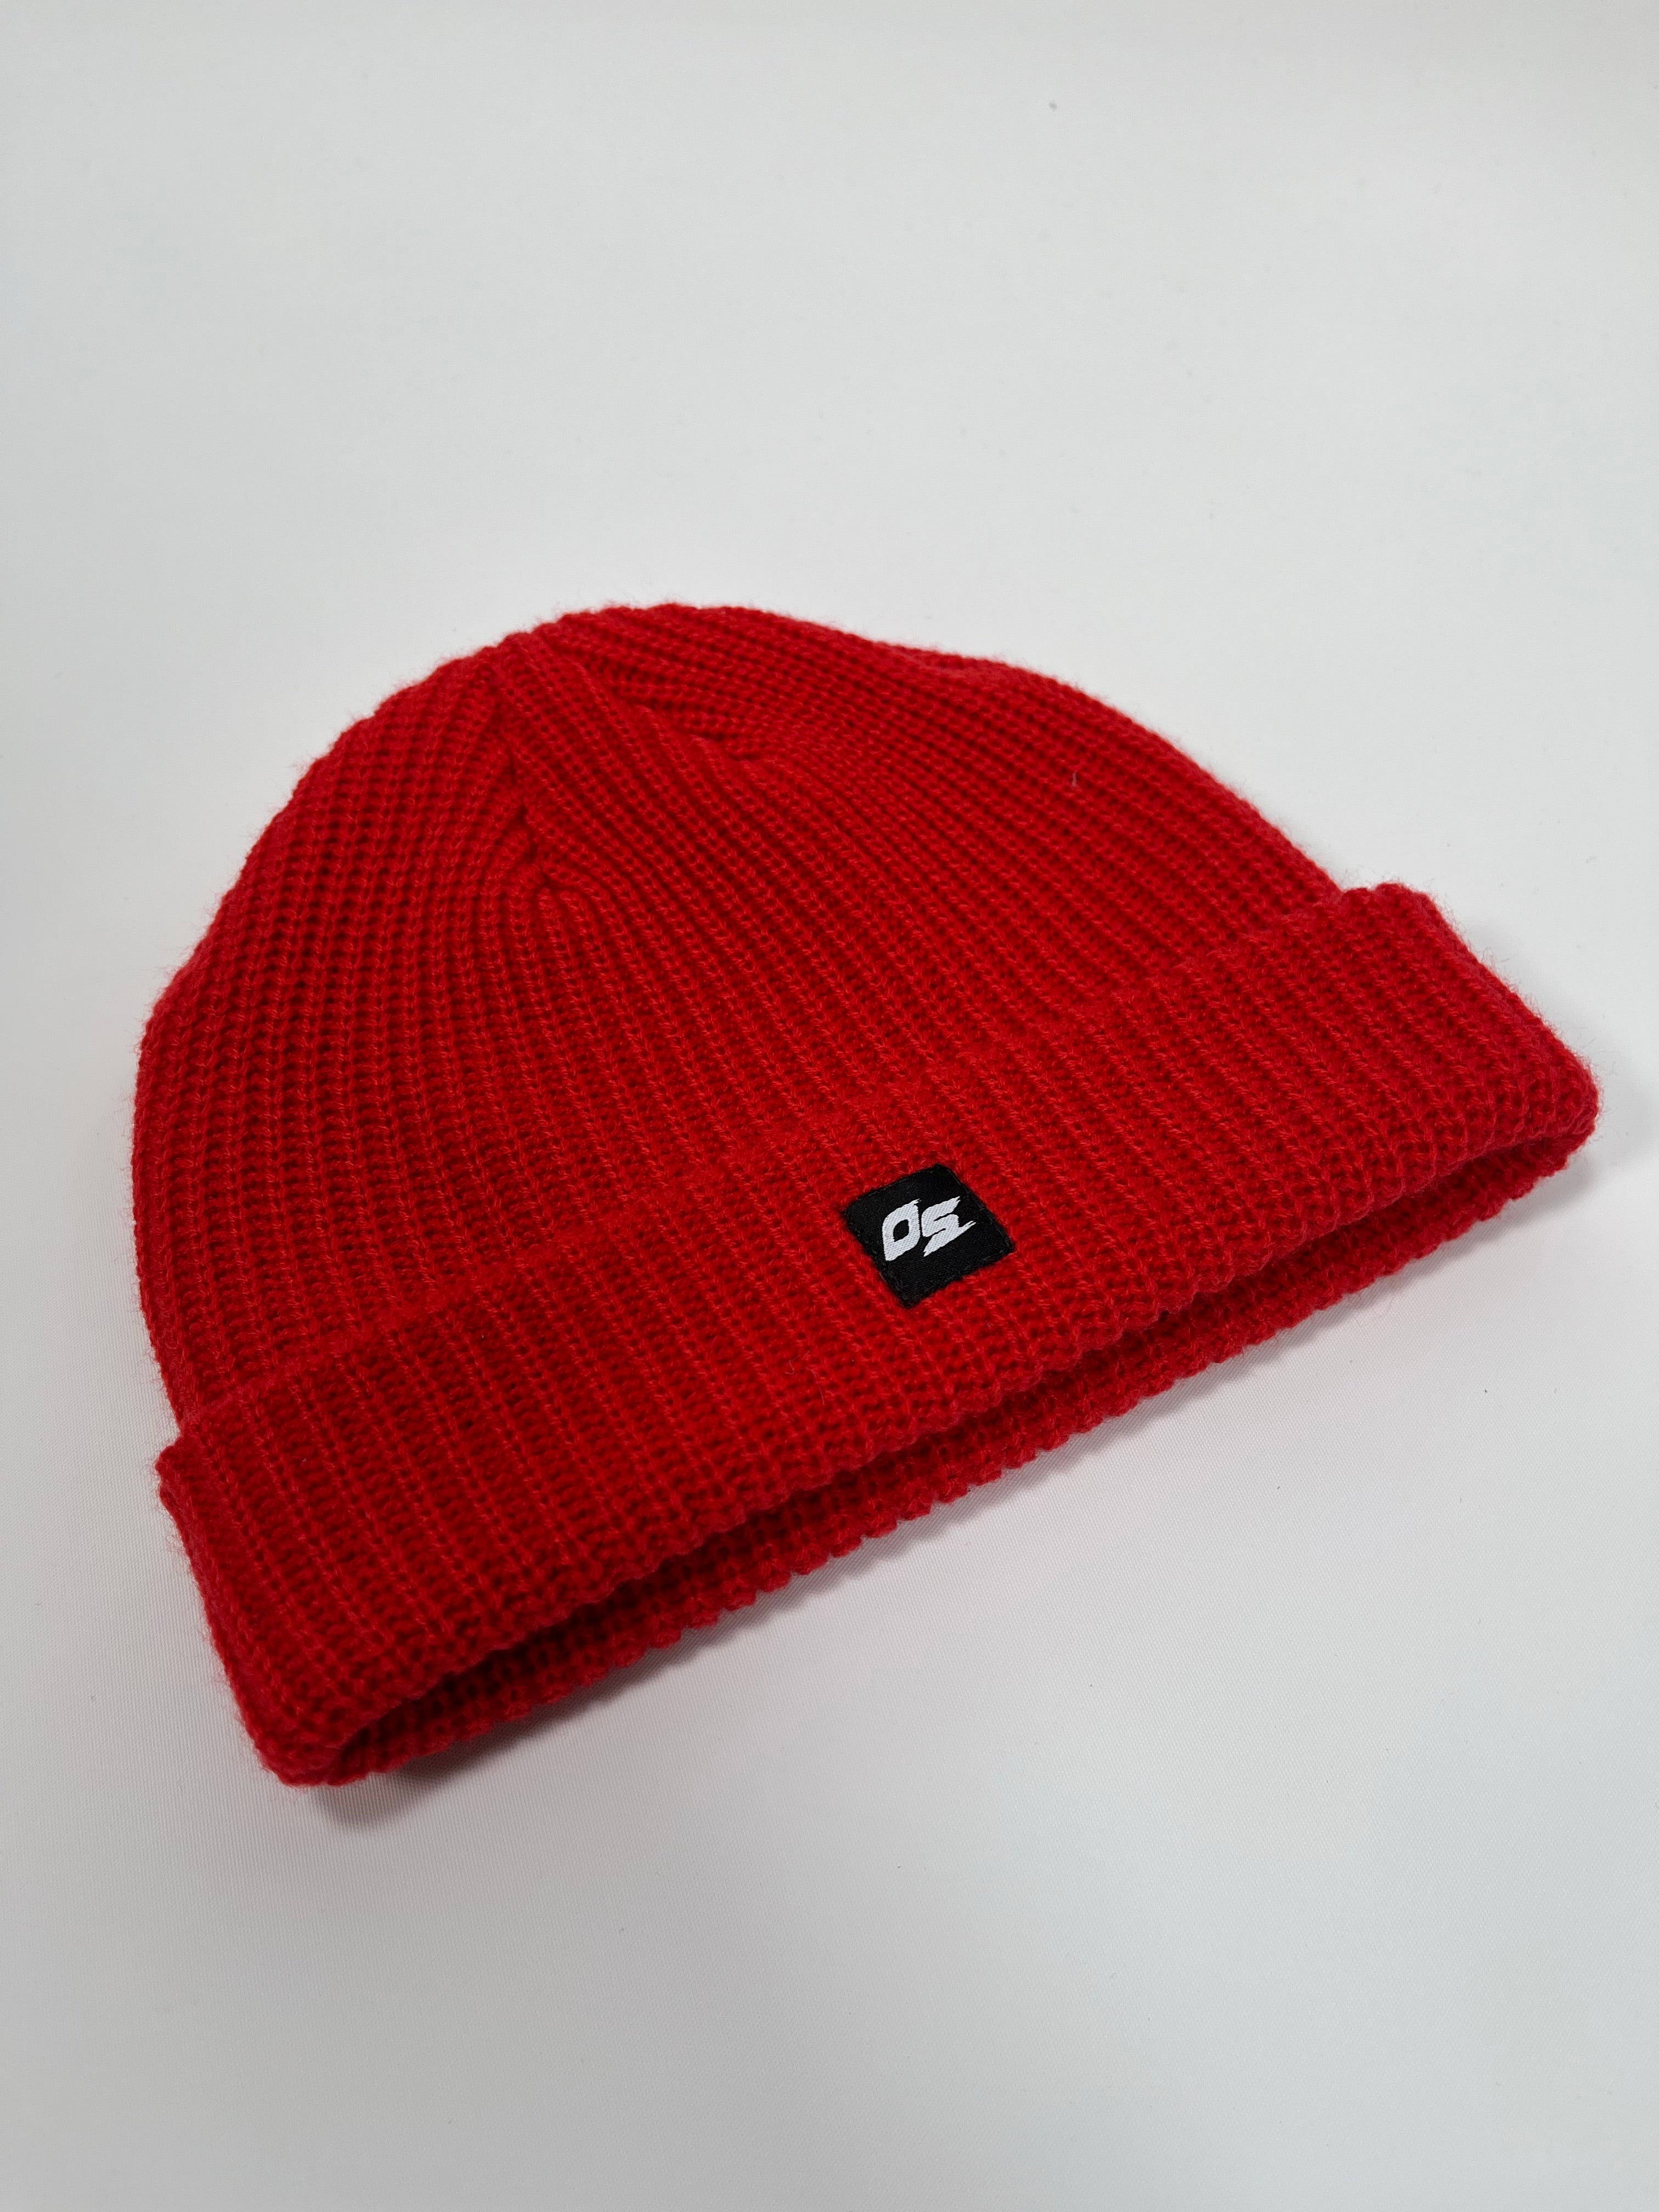 OS® CABLE OTSDR BEANIE- – SPORTS red